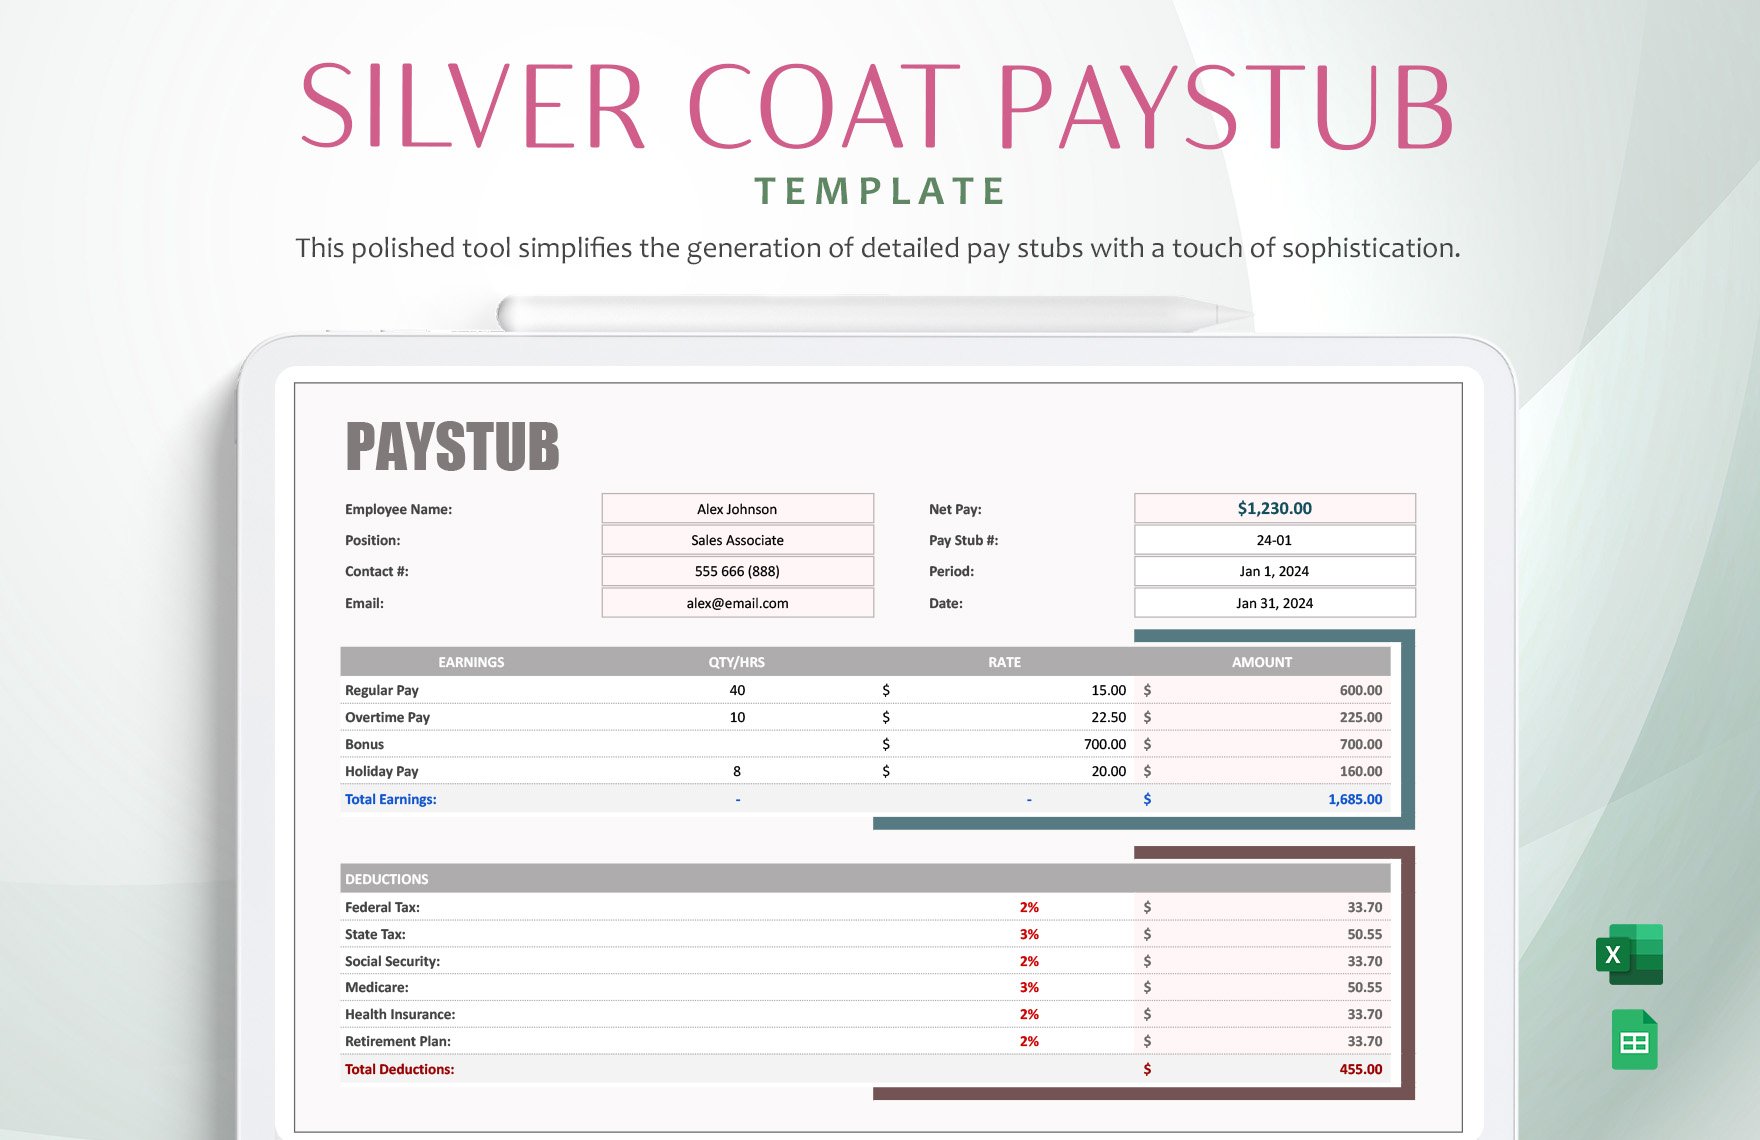 Silver Coat Paystub Template